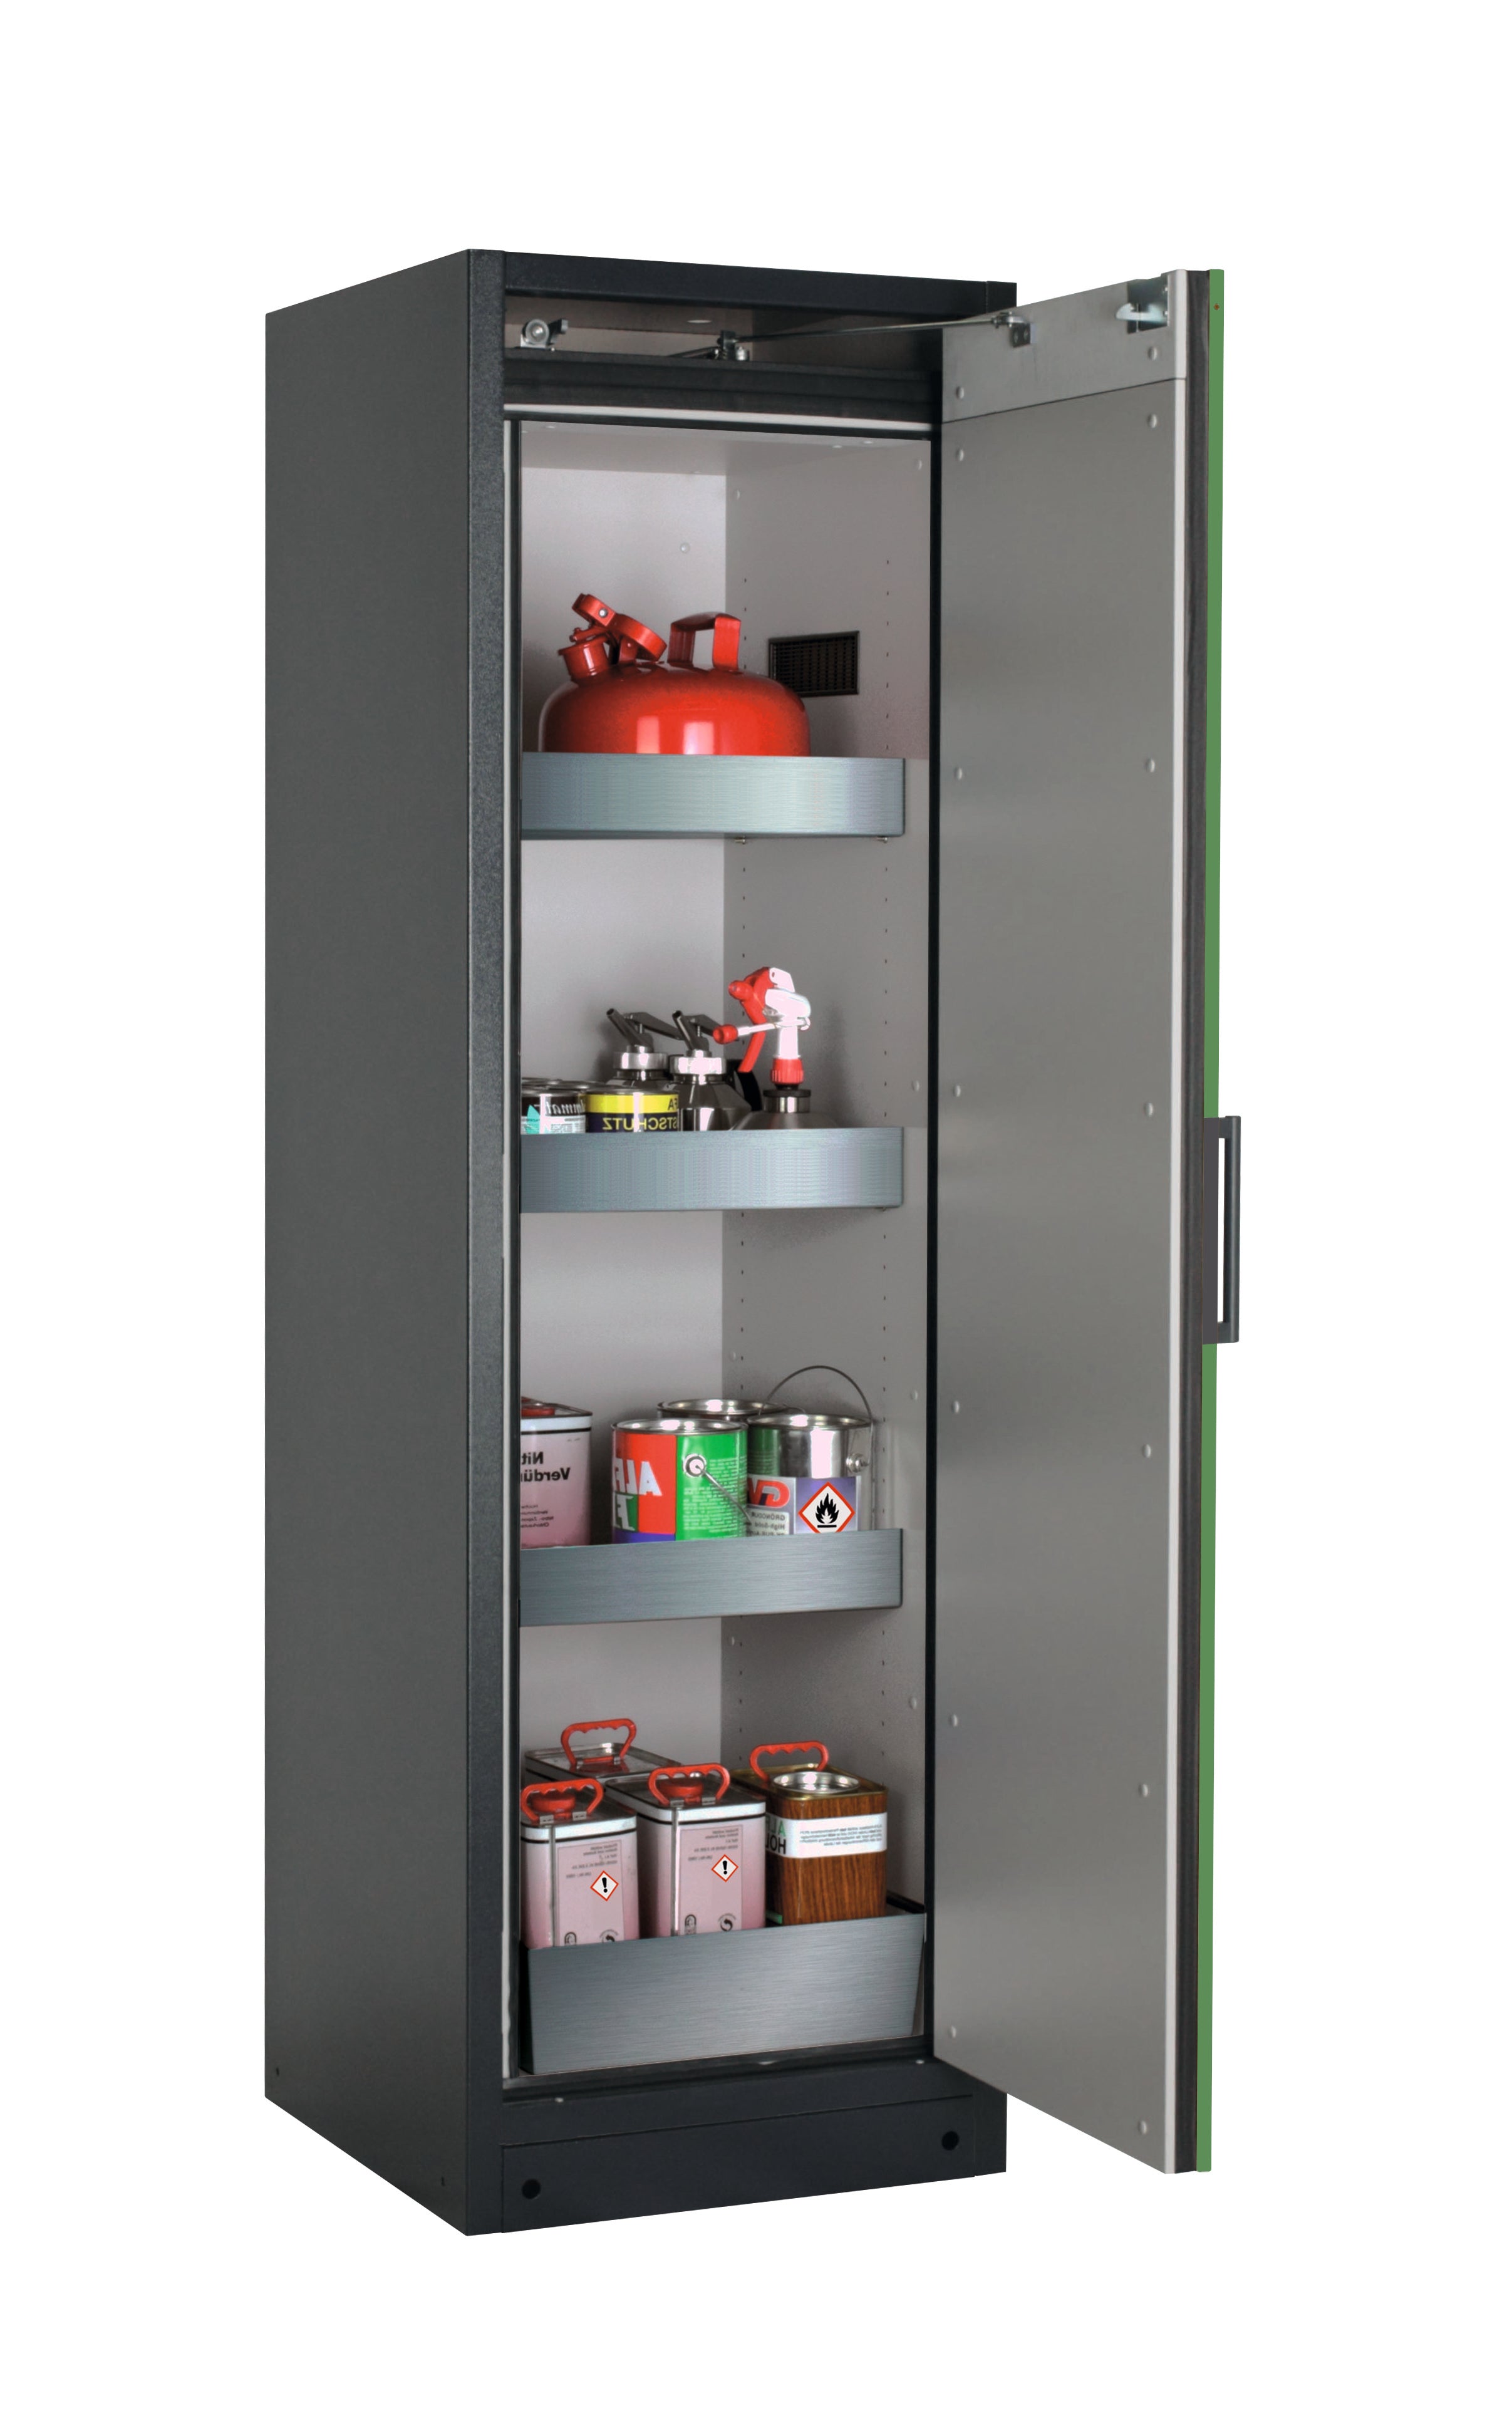 Type 90 safety storage cabinet Q-PEGASUS-90 model Q90.195.060.WDACR in reseda green RAL 6011 with 3x tray shelf (standard) (stainless steel 1.4301),